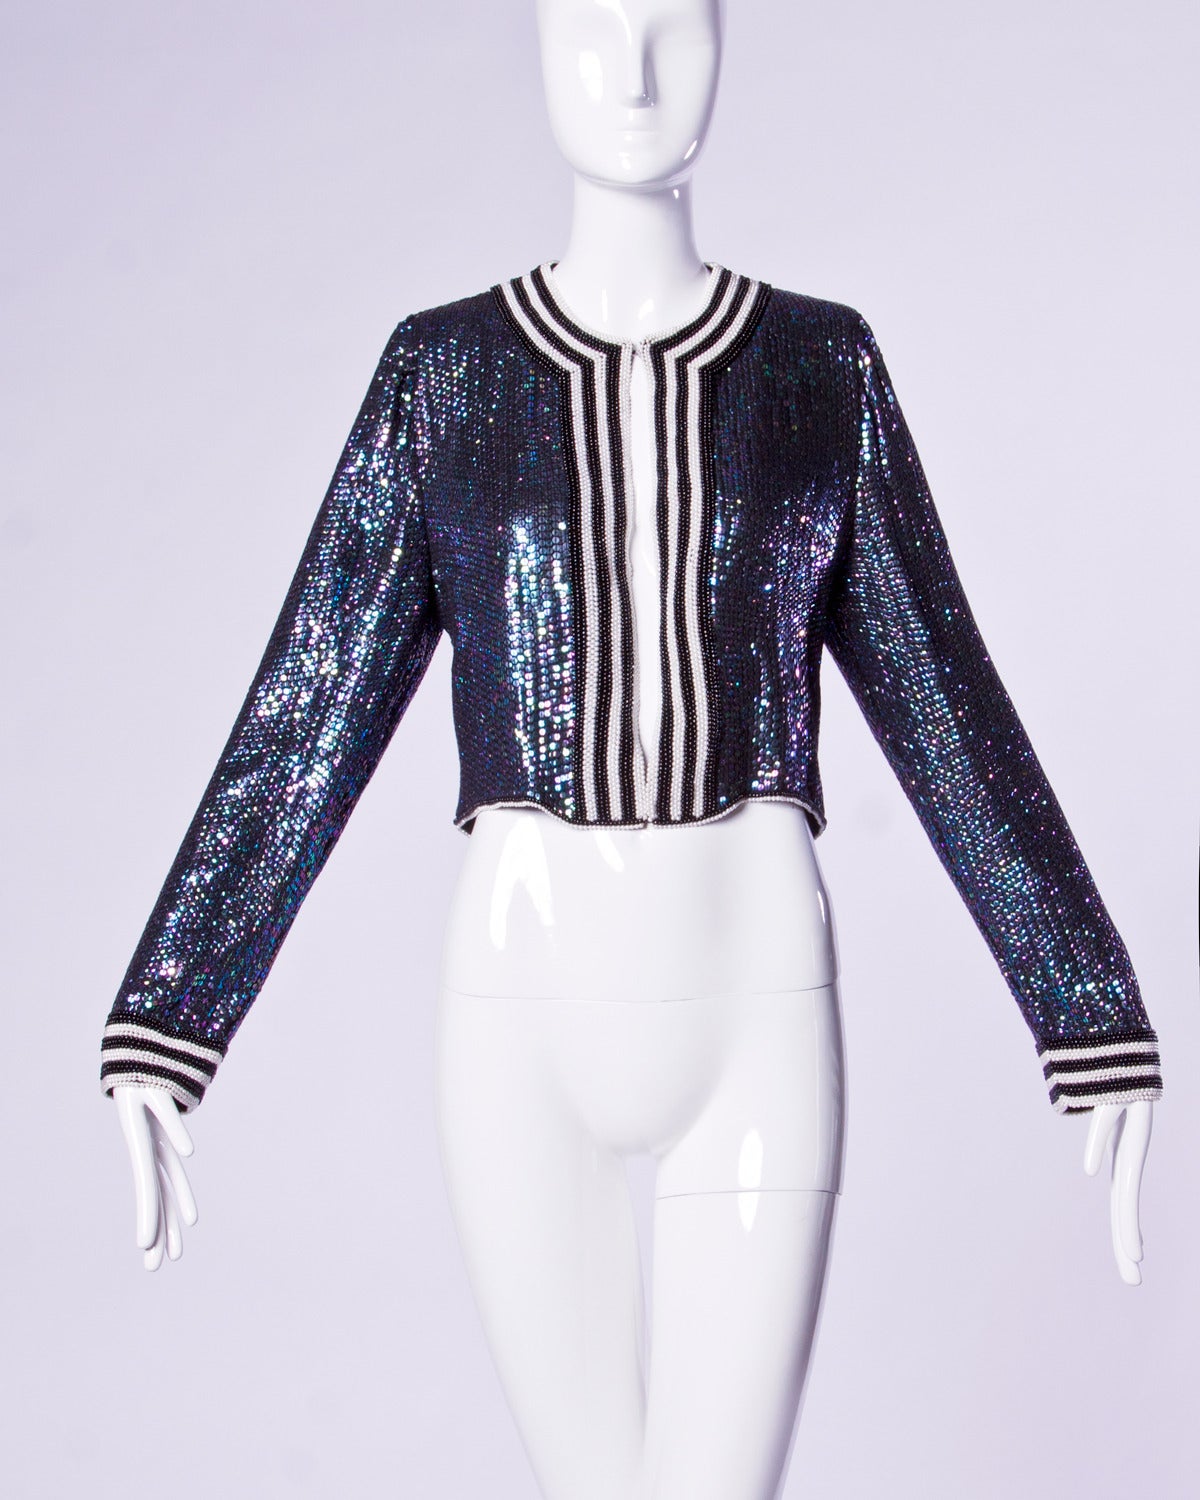 Rare Estevez couture silk jacket with iridescent blue sequins and beaded trim. This jacket features two white birds on the back which are made up entirely of sequins and beads.

Details: 

Fully Lined
Front Hook Closure
Marked Size: